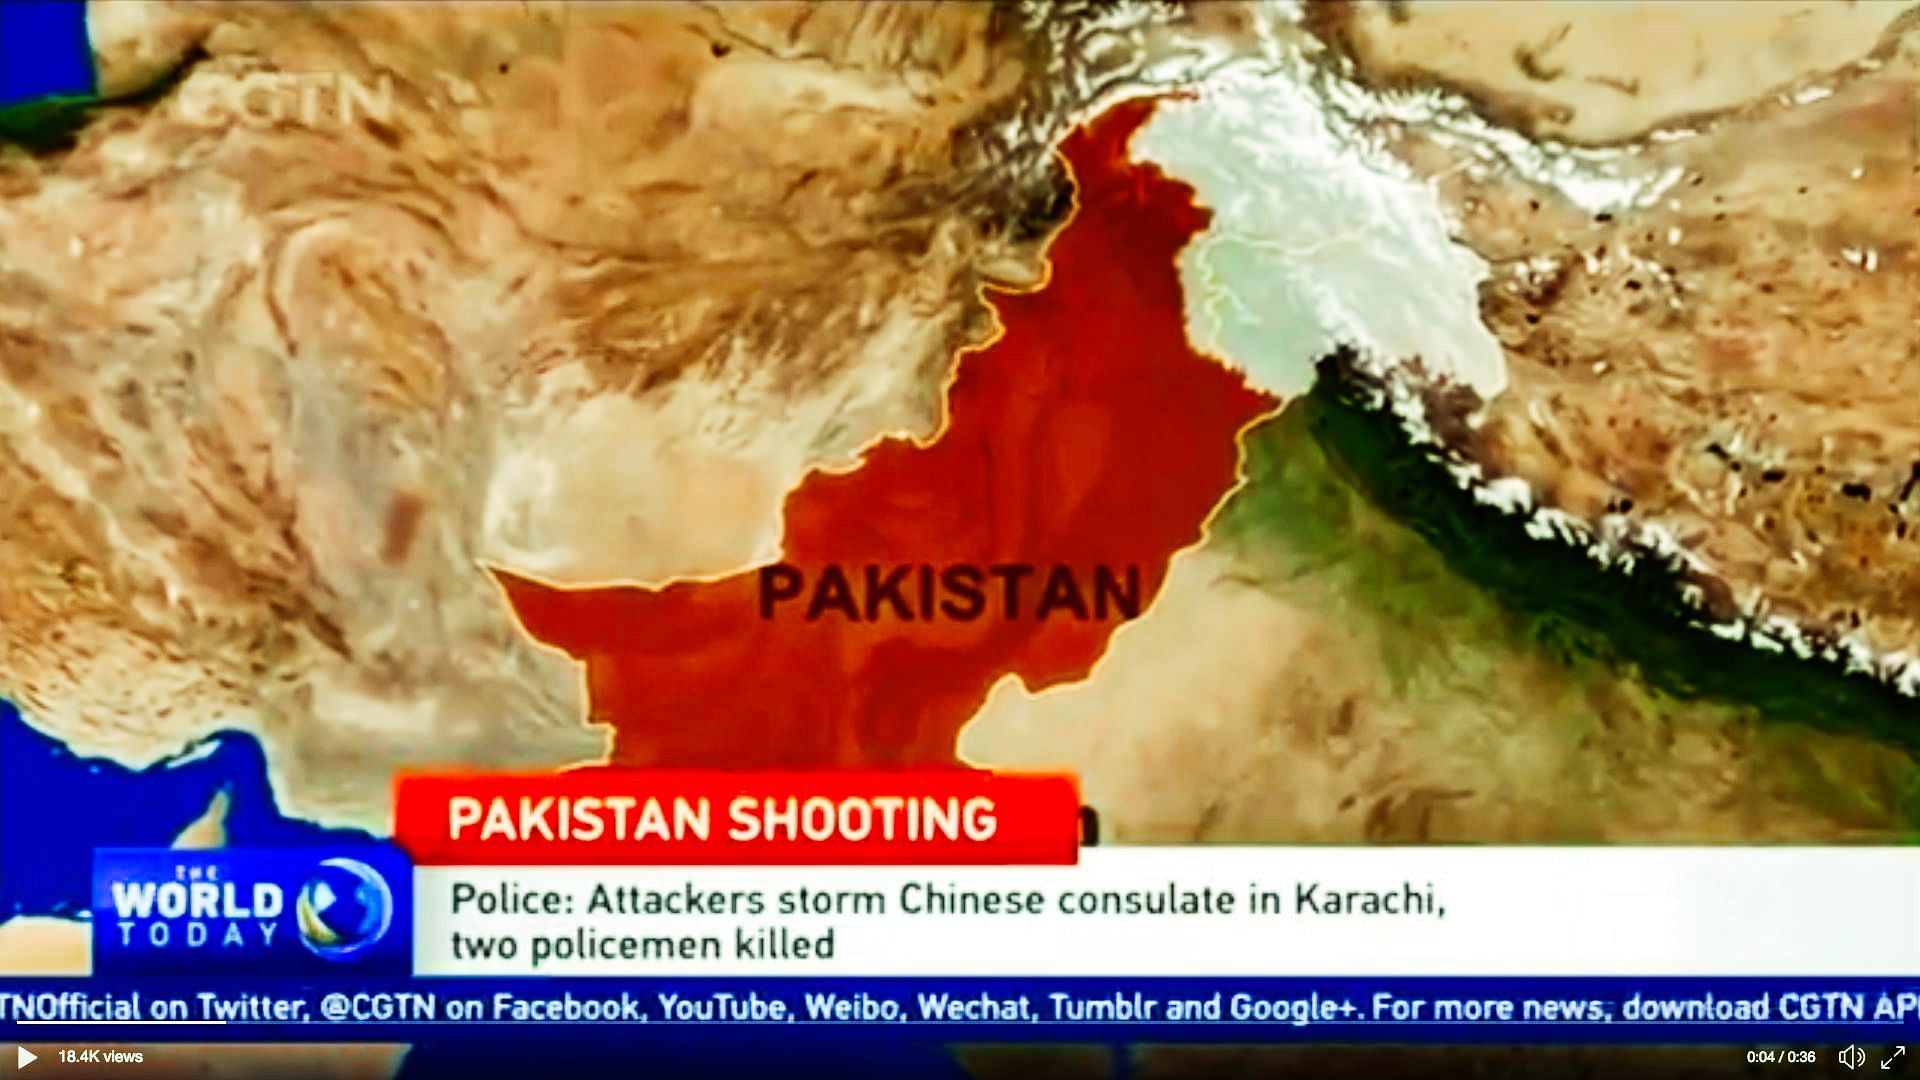 The map used by CGTN shows Pakistan-occupied Kashmir as part of India.&nbsp;